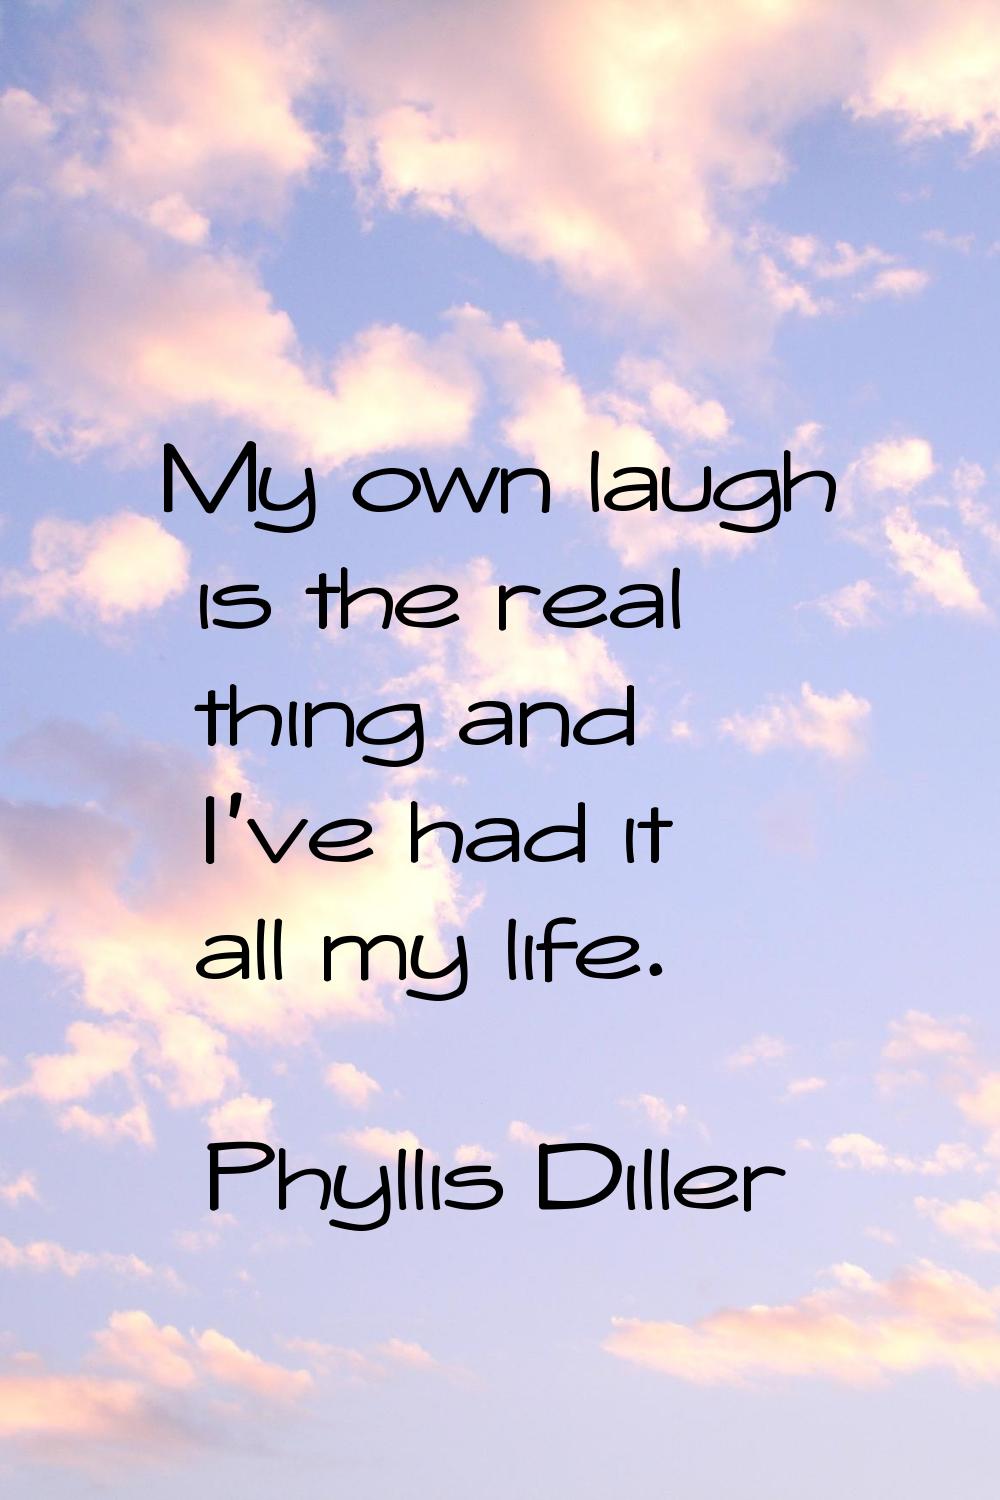 My own laugh is the real thing and I've had it all my life.